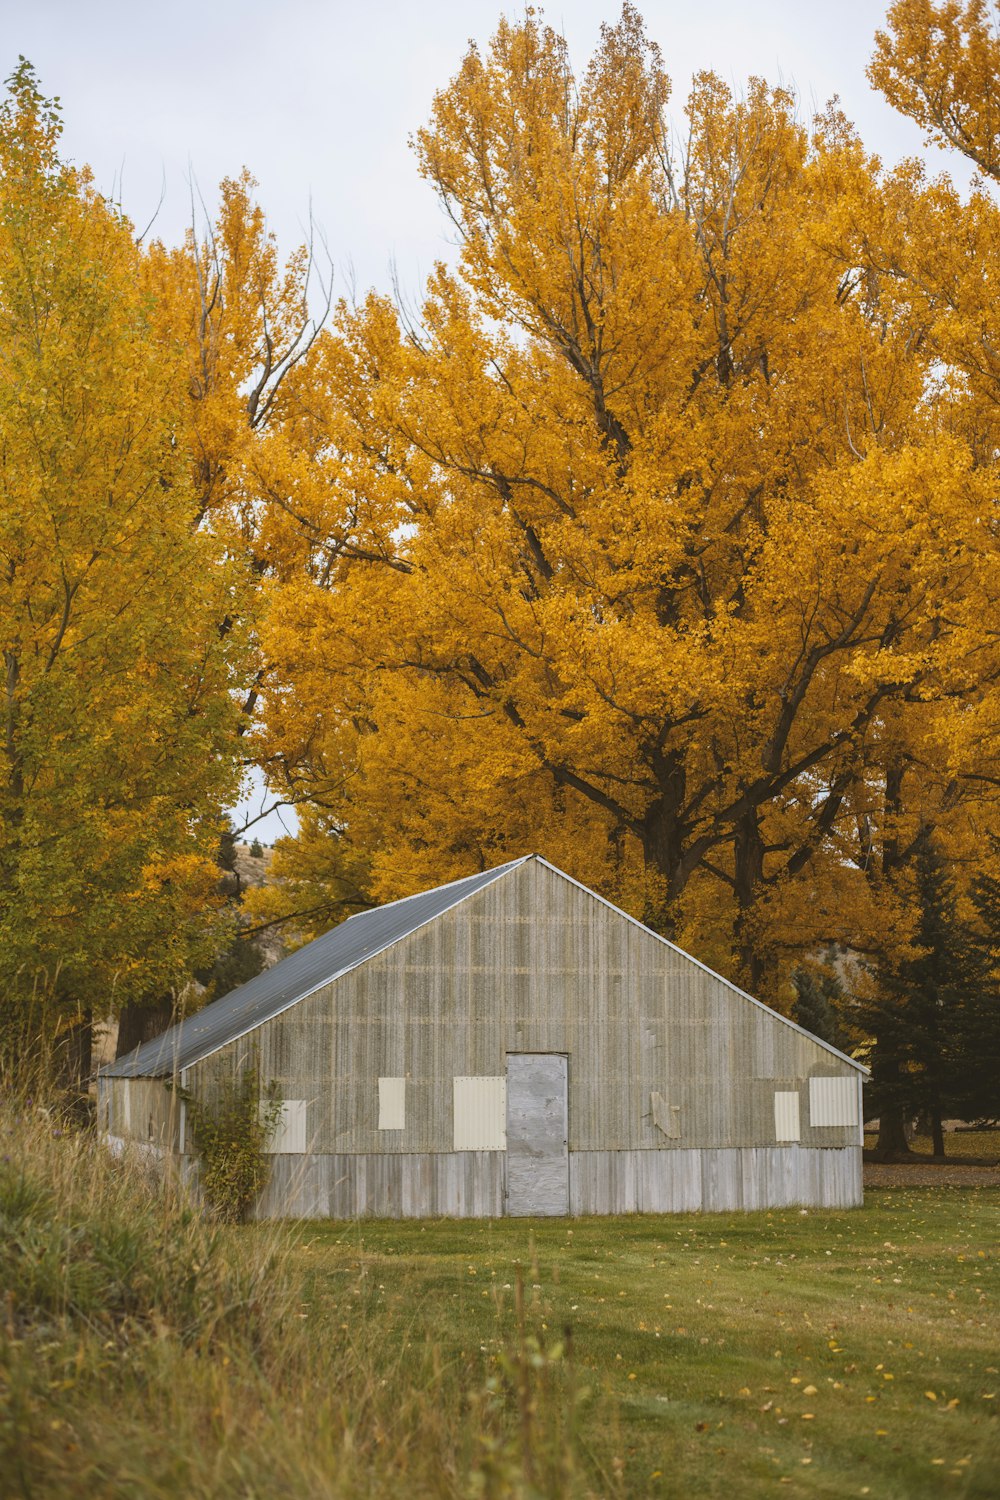 a barn in the middle of a field with trees in the background